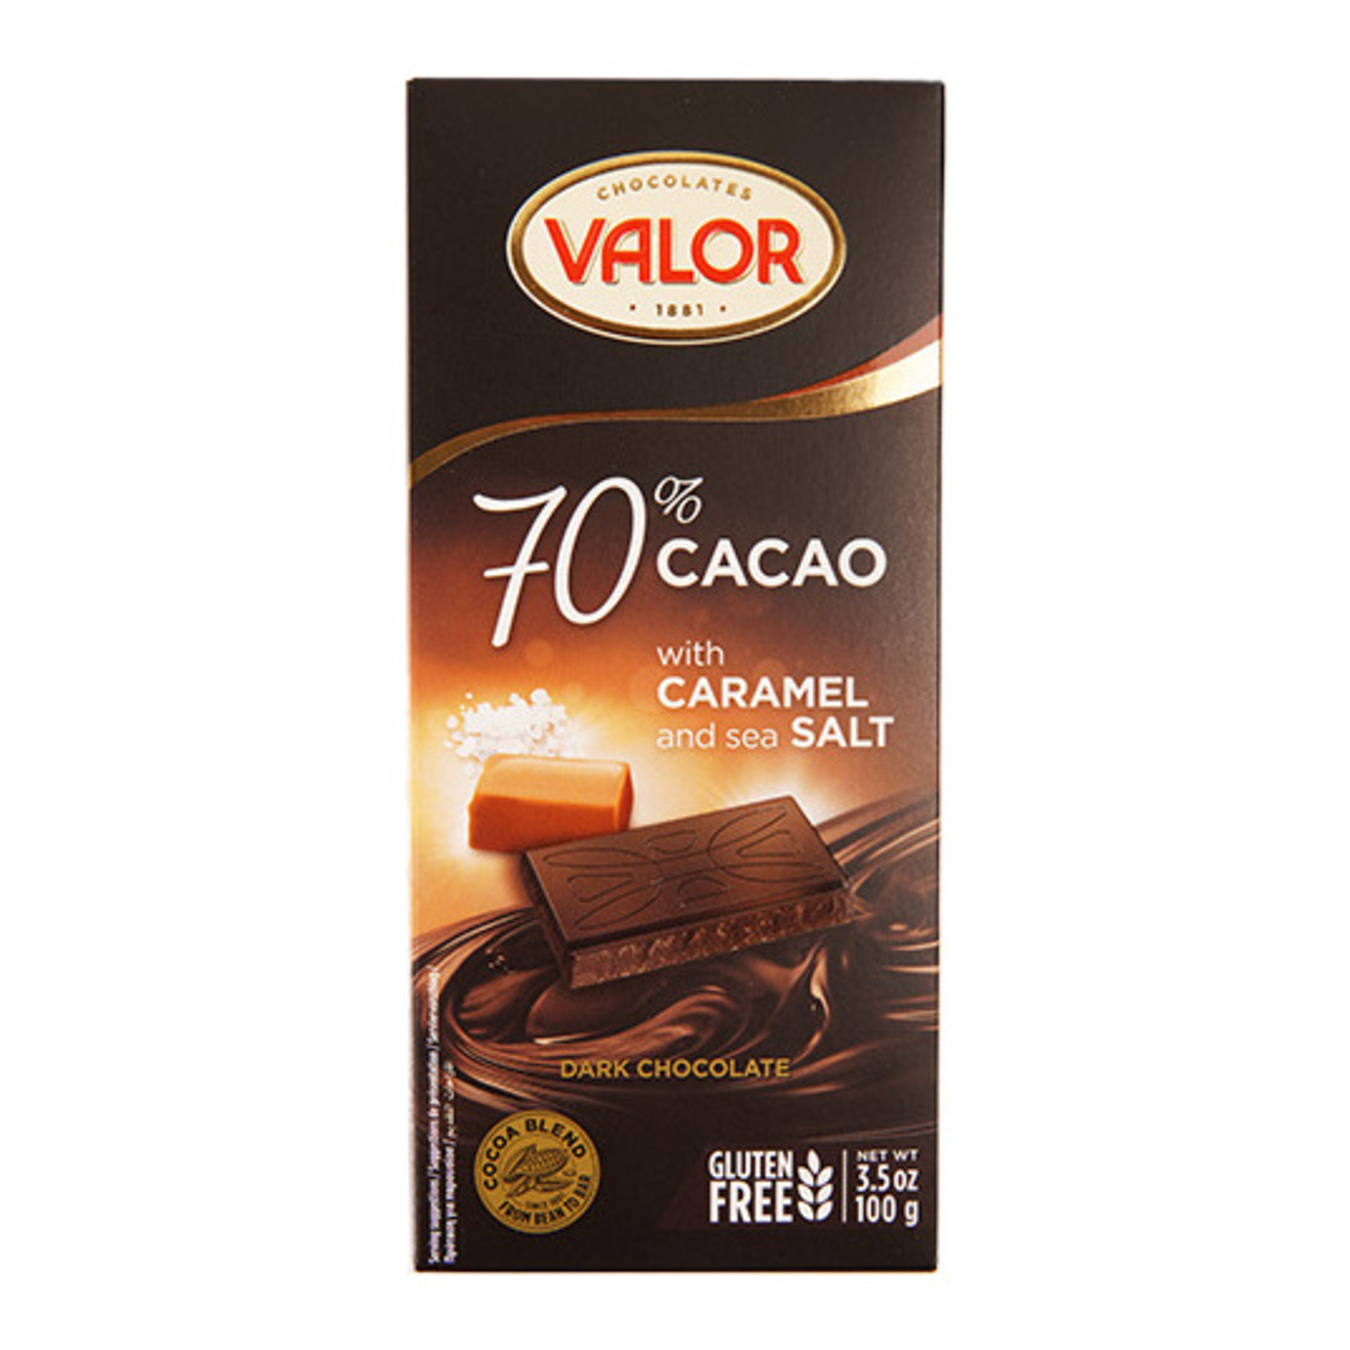 Black Chocolate Valor With Toffi And Salt 70% 100g